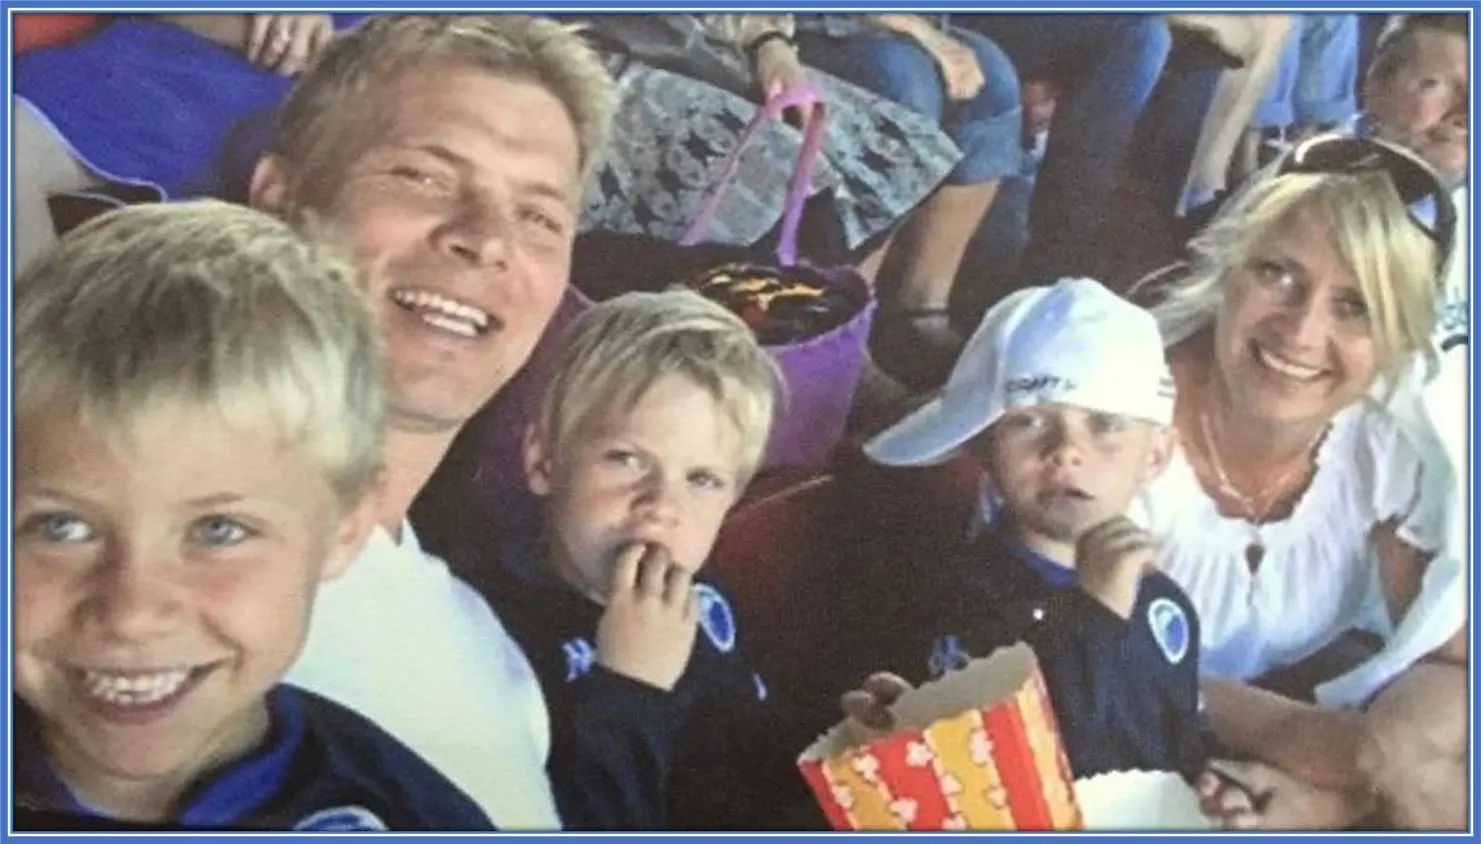 From left to right, we have Rasmus, his Dad, Anders Højlund, the twins (Oscar and Emil), and their Mum, Kirsten Winther.